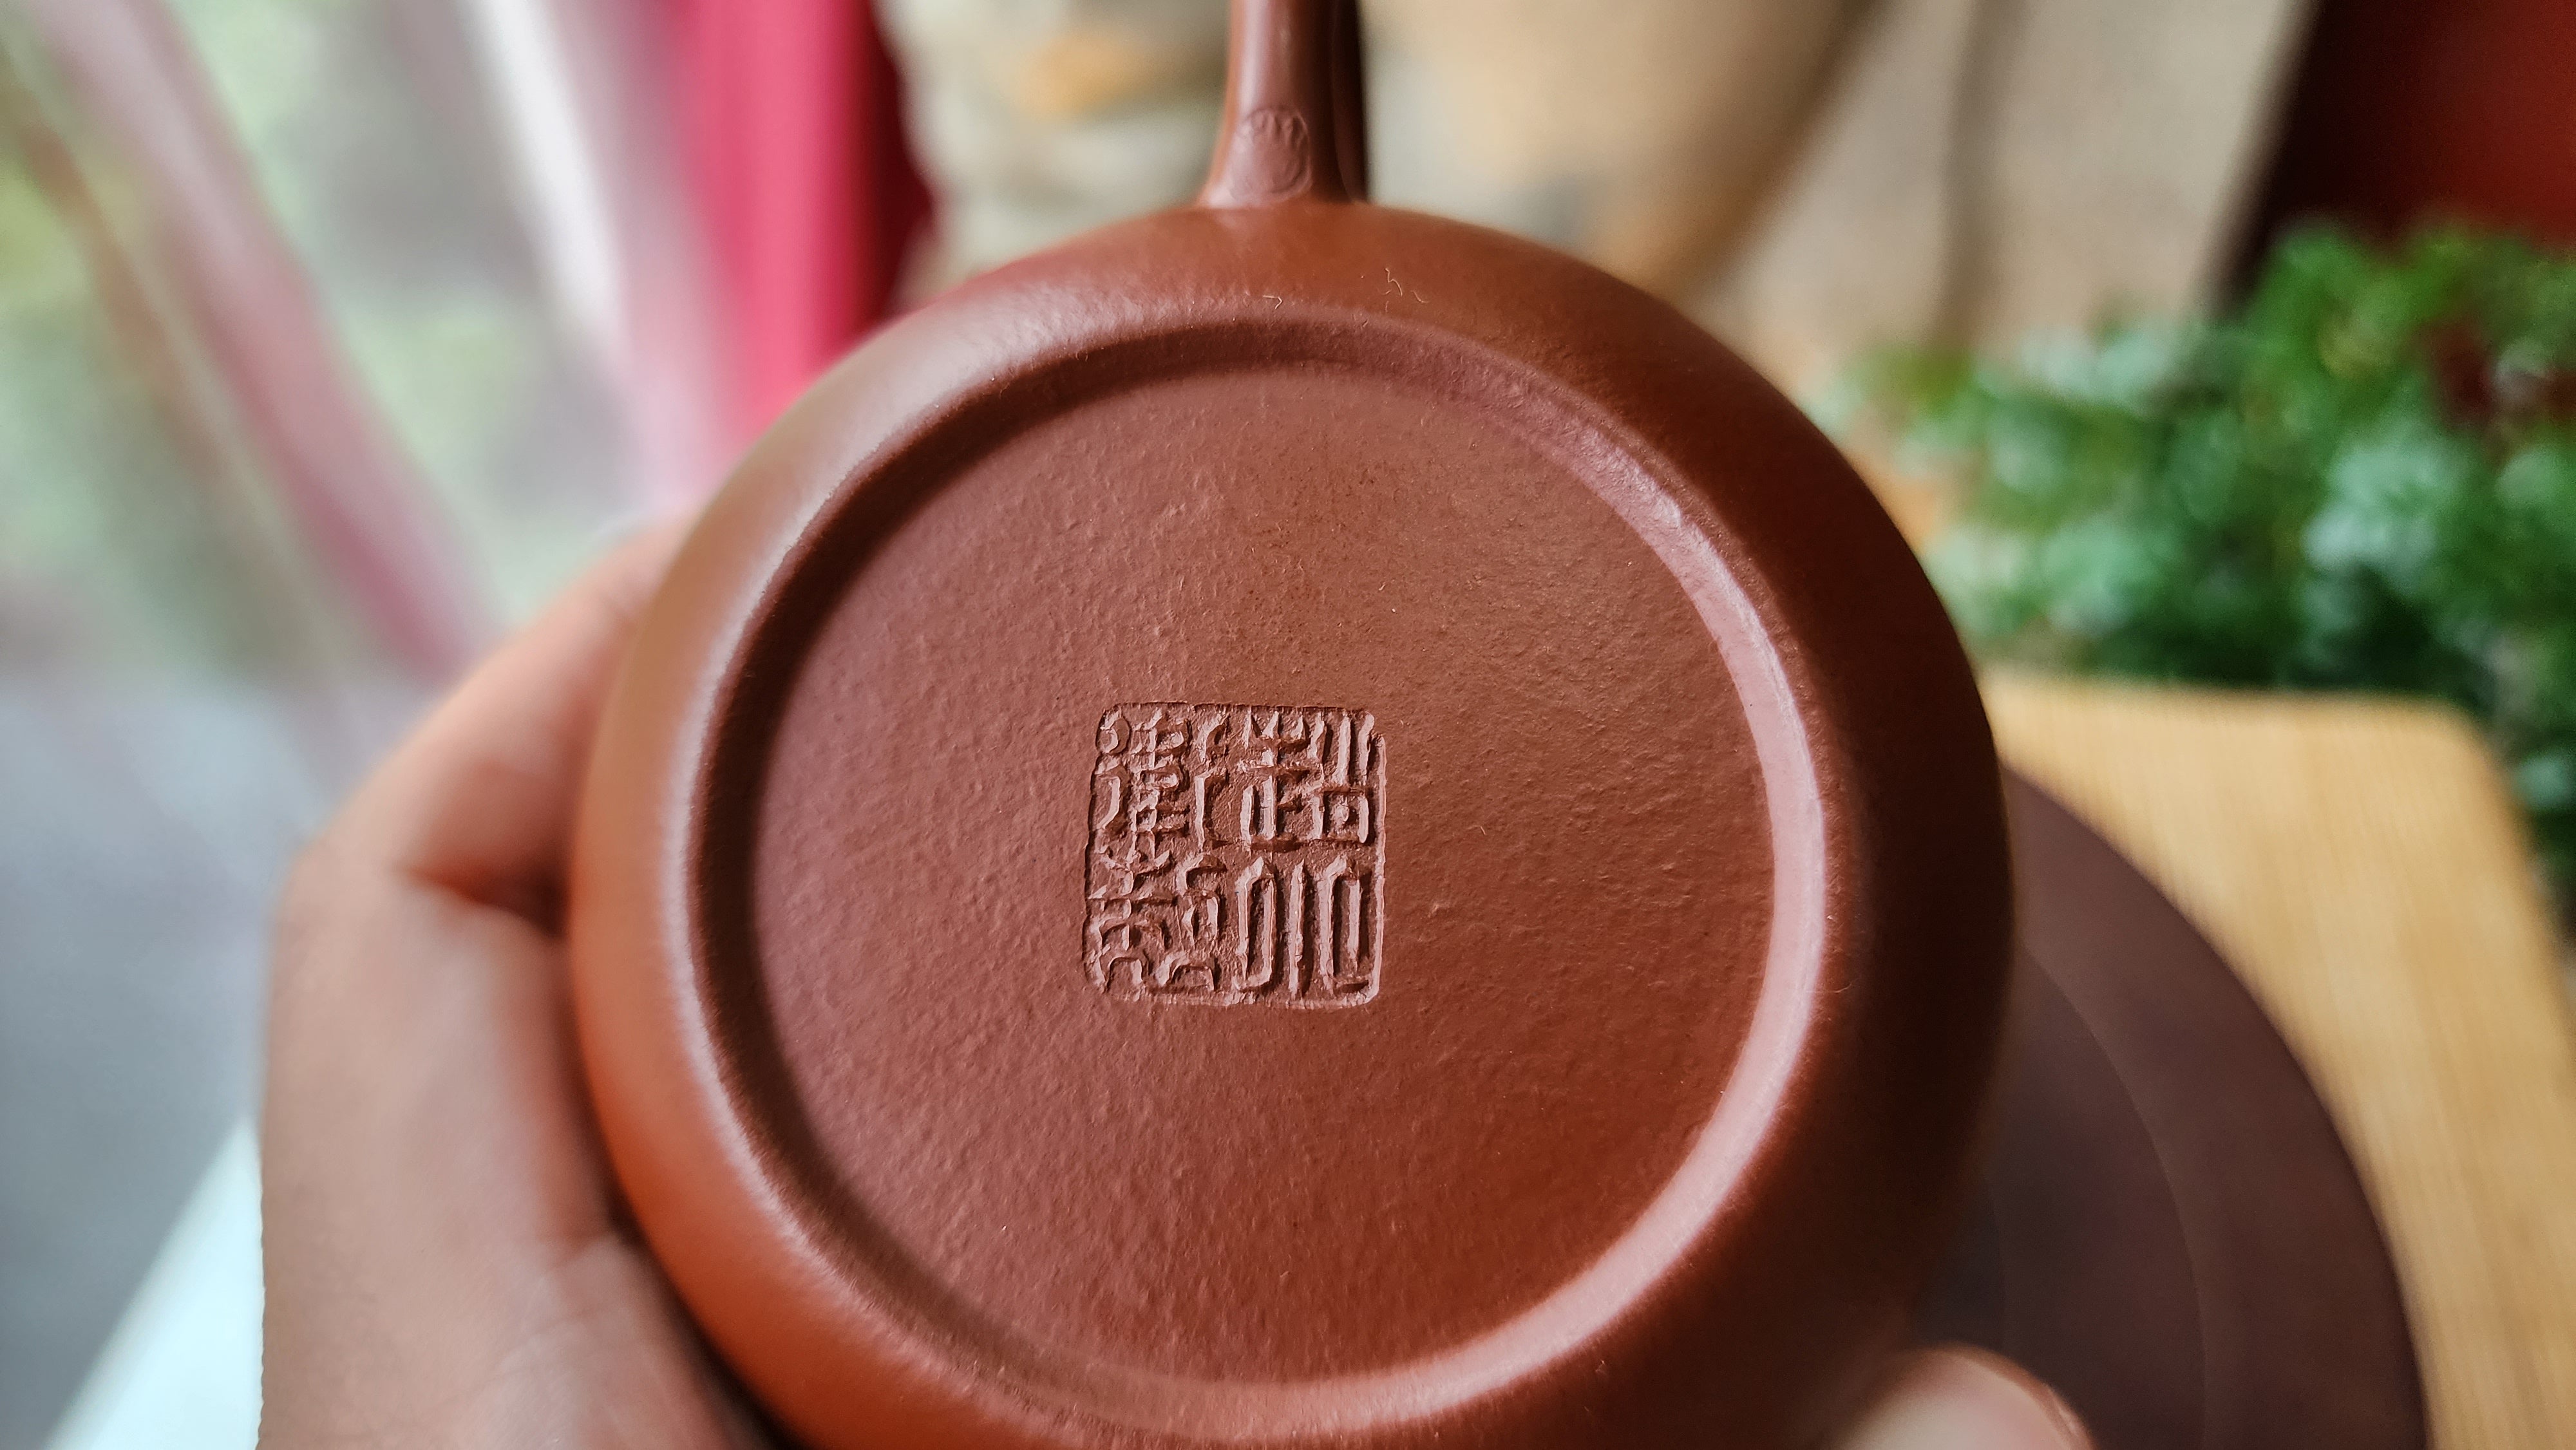 Li Xing 梨形, XiaoMeiYao ZhuNi 小煤窑朱泥, by our collaborative Craftsman Zhao Xiao Wei 赵小卫。Bamboo engraving and Calligraphy inscription by L4 Assoc Master Artist Xing Su 行素。135ml.